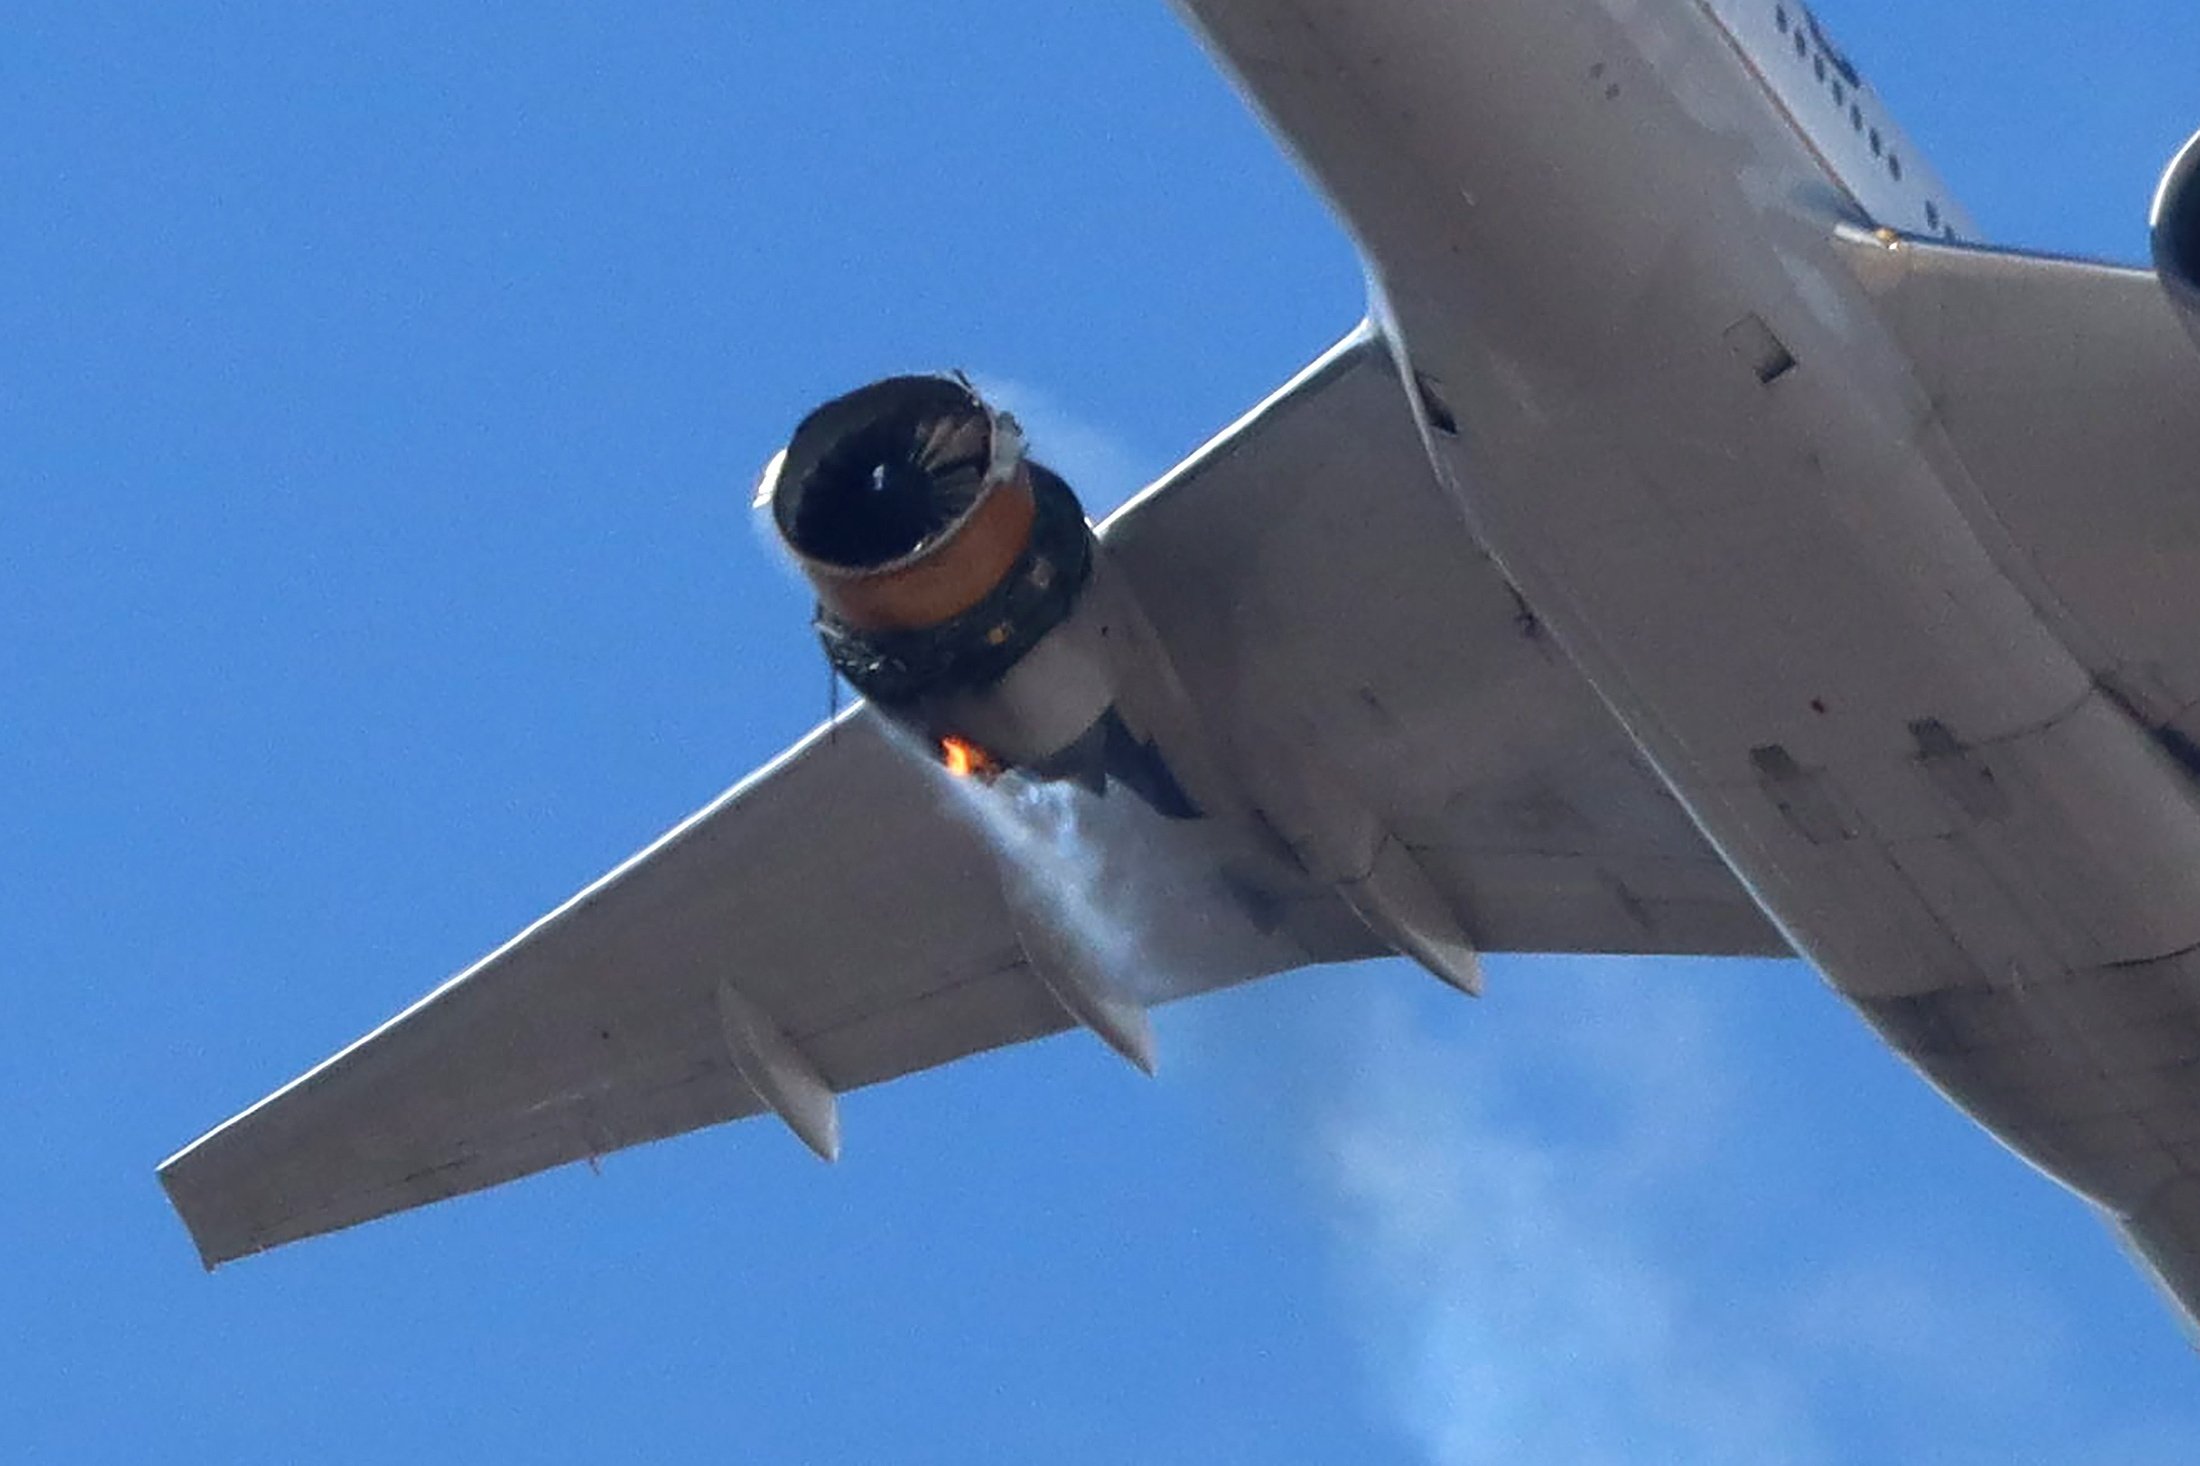 United Airlines flight UA328, carrying 231 passengers and 10 crew on board, returns to Denver International Airport with its starboard engine on fire after it sent a Mayday alert, over Denver, Colorado, U.S., Feb. 20, 2021. (Reuters Photo)